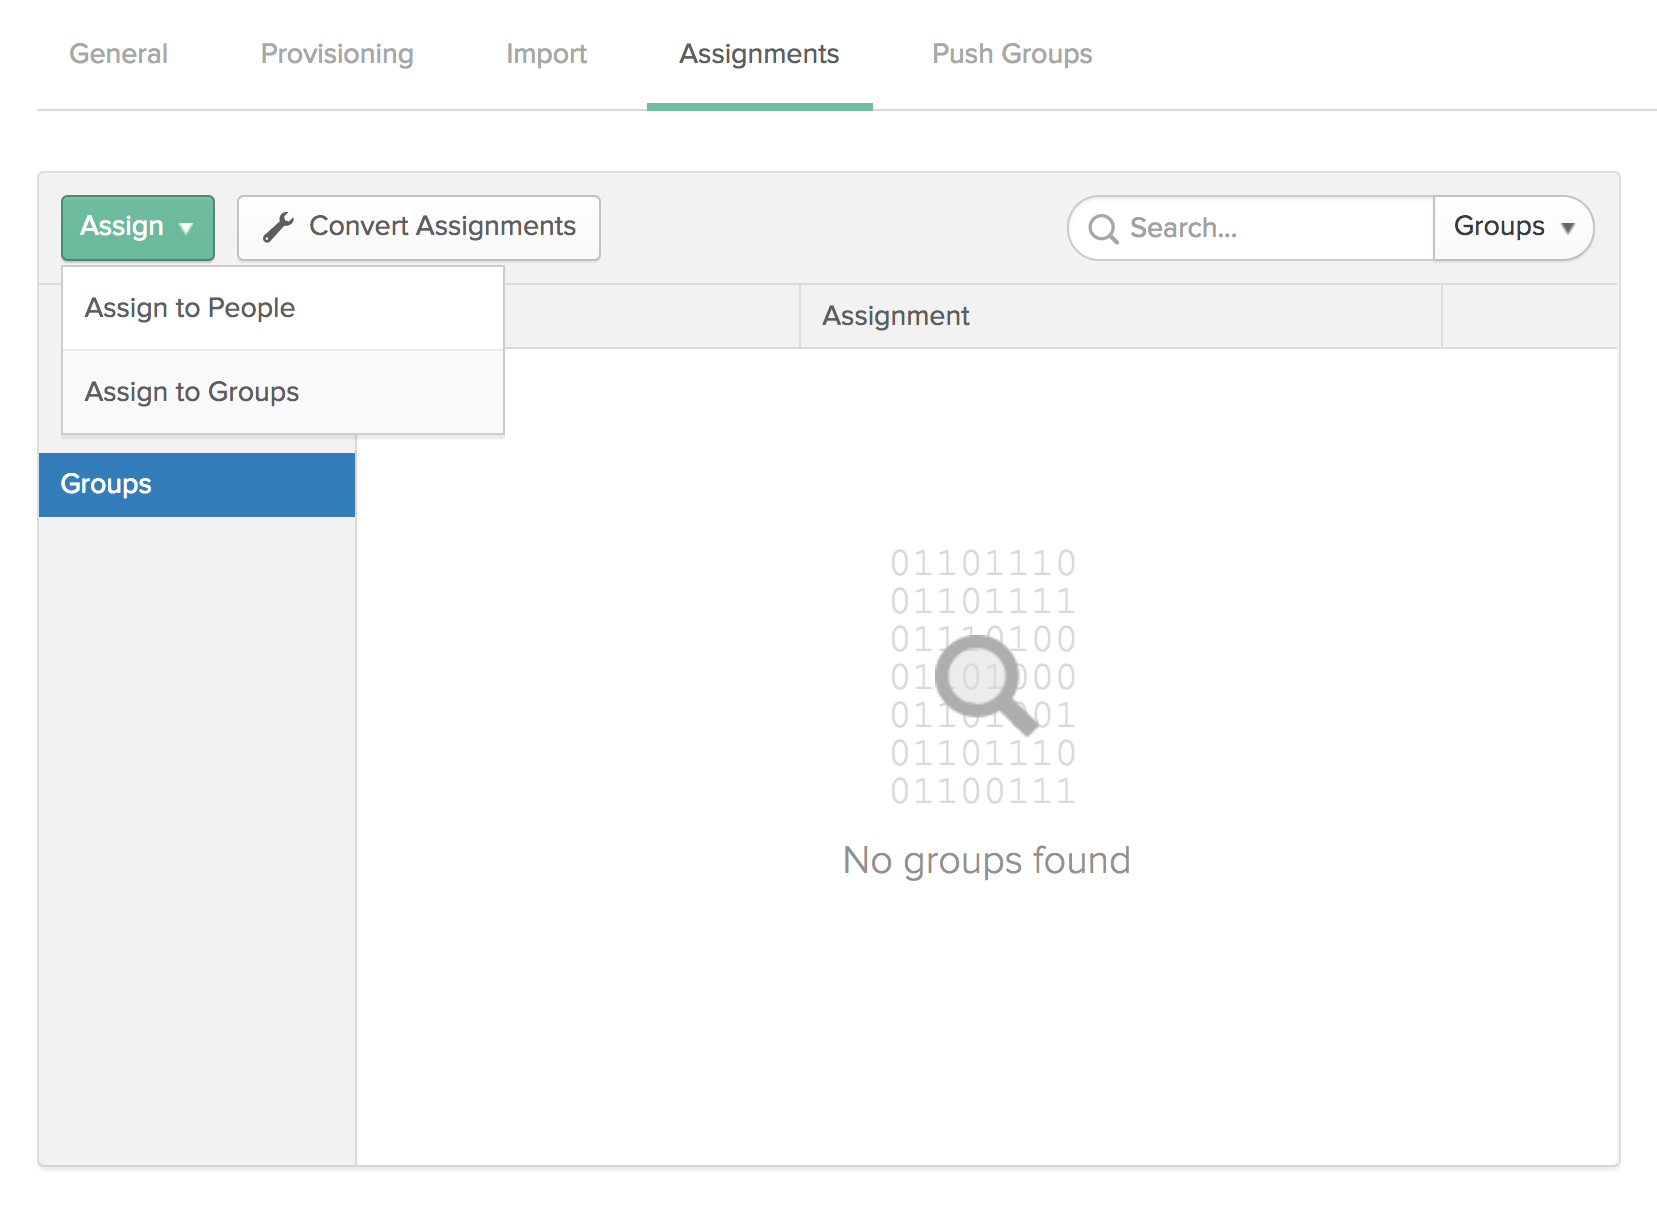 Assignment tab, Assign to groups is selected. 